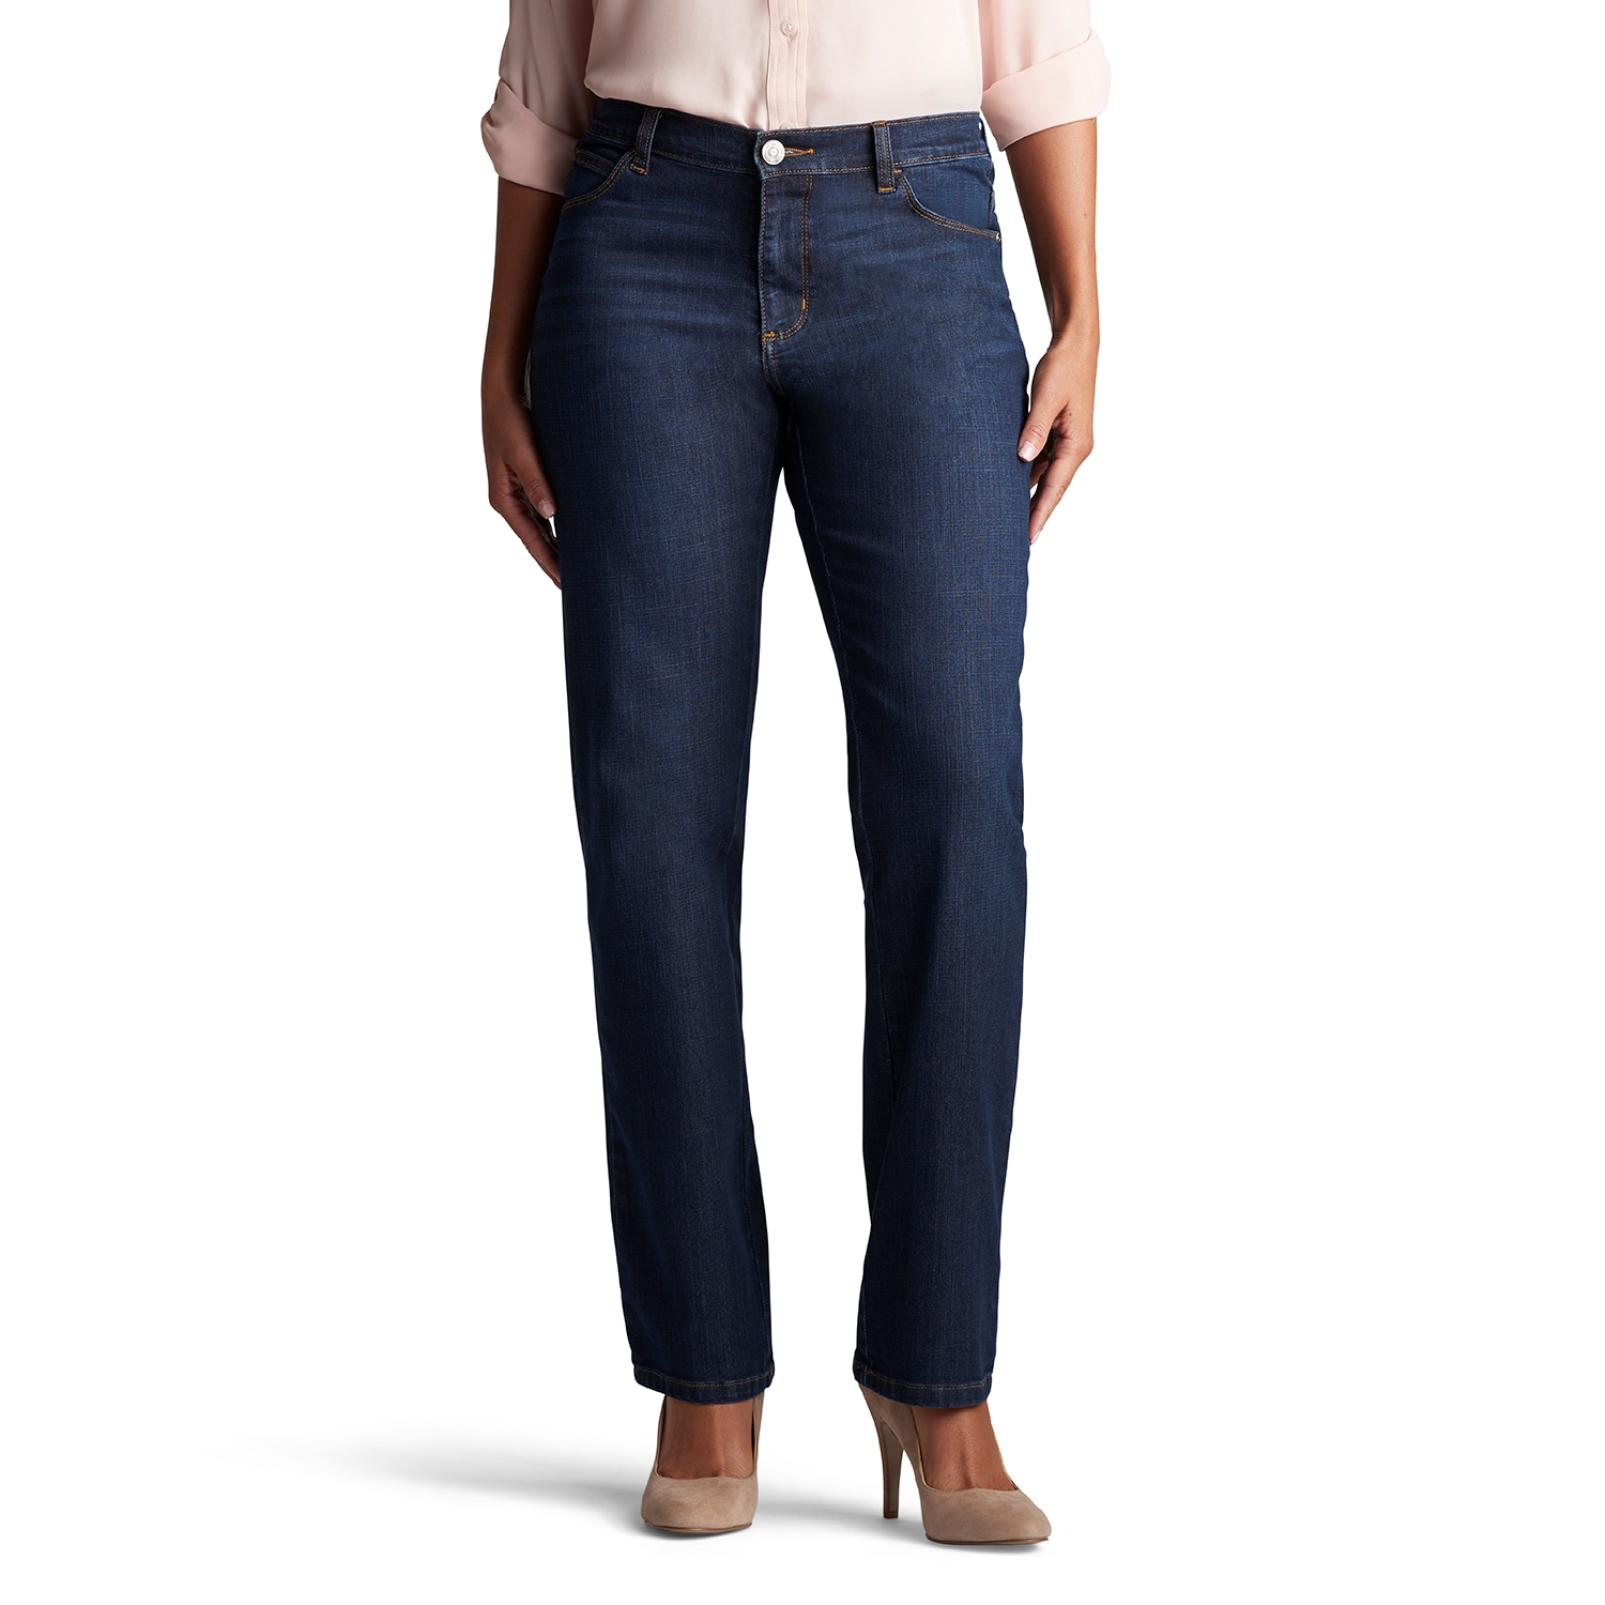 LEE Women's Relaxed Fit Straight Leg Jeans